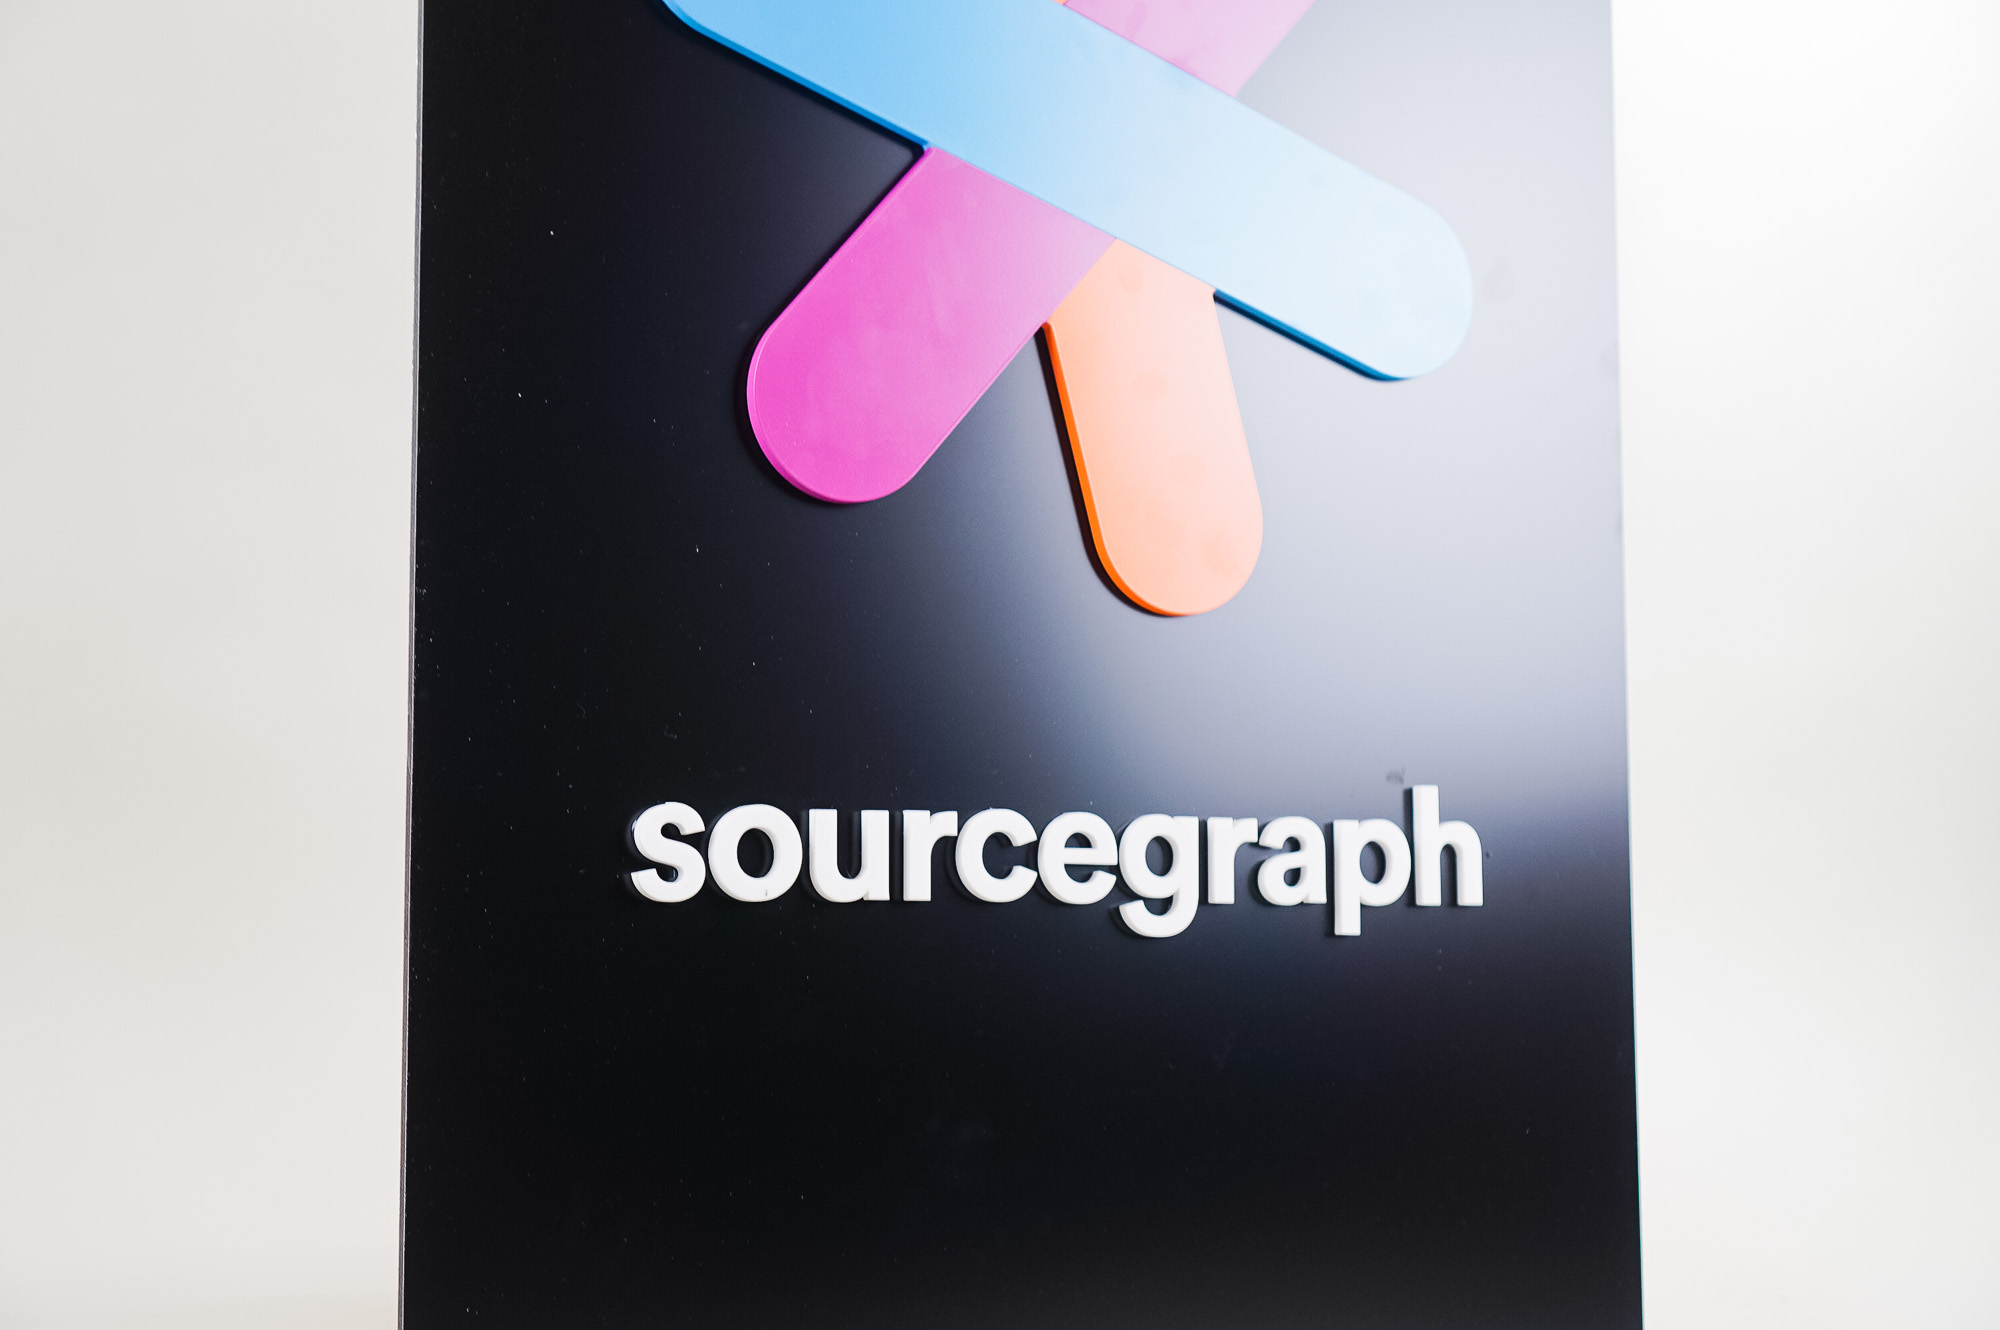 Simple black blade sign with colored logo for Sourcegraph, a San Francisco-based company that adds code intelligence to GitHub and other code hosts.